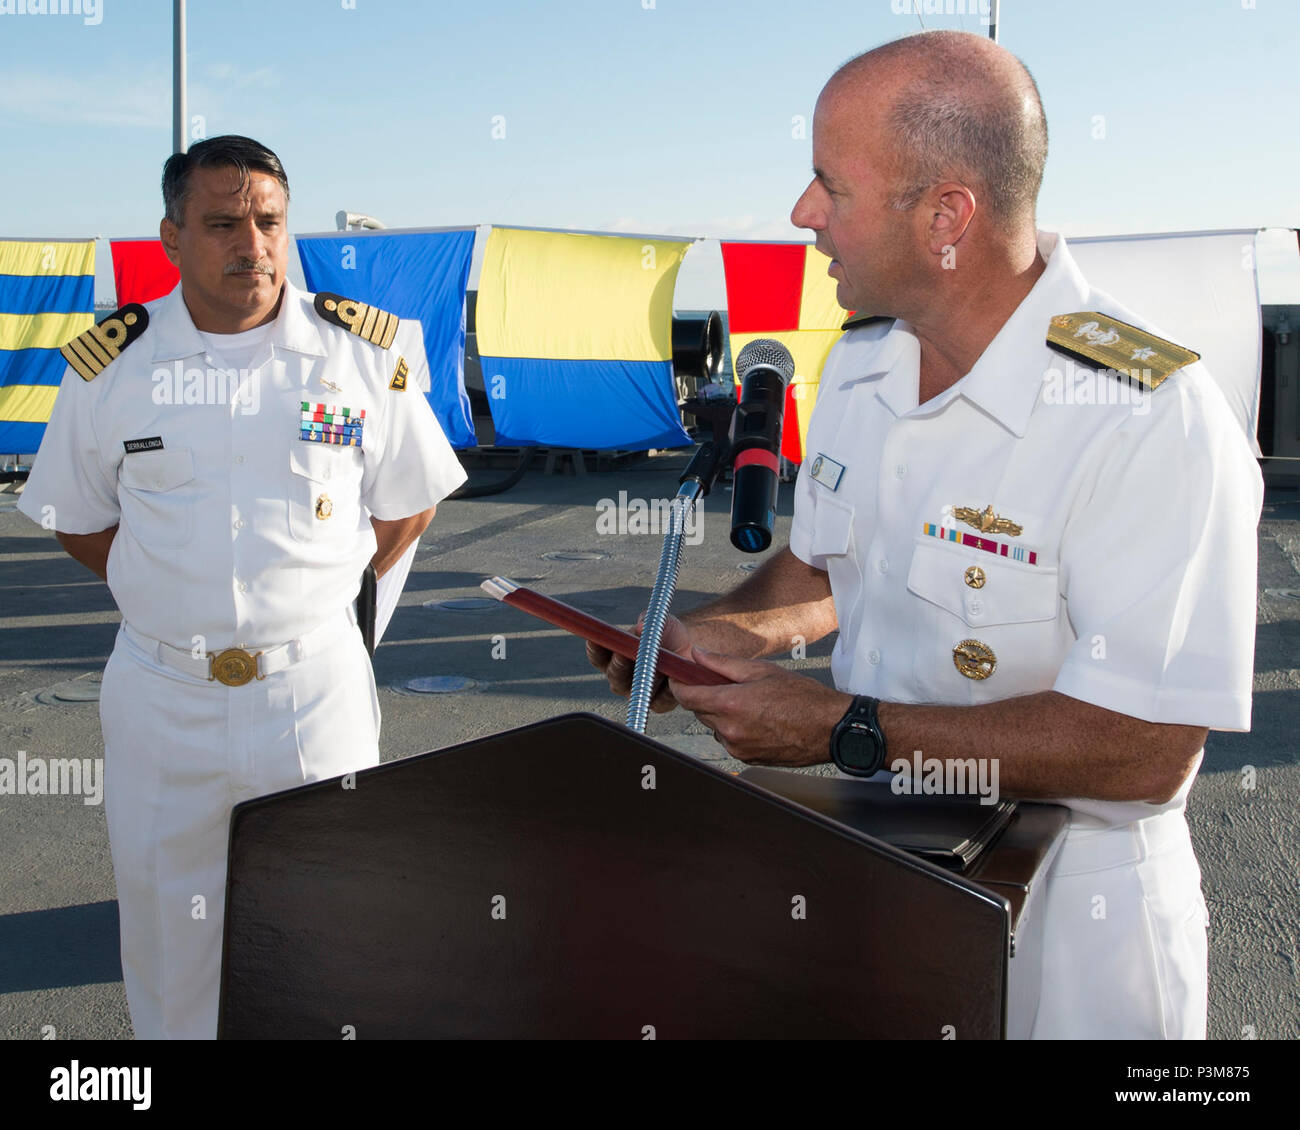 SAN DIEGO (July 5, 2016) Rear Adm. James Kilby, Commander, Naval Surface and Mine Warfare Development Center, right, presents Mexican navy Capt. Sergio Serrallonga Sanchez, Commander, Naval Flotilla of Destroyers of Pacific Naval Forces, left, with a plaque commemorating the two countries’ partnership as part of the Southern California portion of the Rim of the Pacific (RIMPAC) 2016 exercise during a reception aboard the Mexican navy tank landing ship ARM Usumacinta (A-412). Twenty-six nations, more than 40 ships and submarines, more than 200 aircraft and 25,000 personnel are participating in  Stock Photo